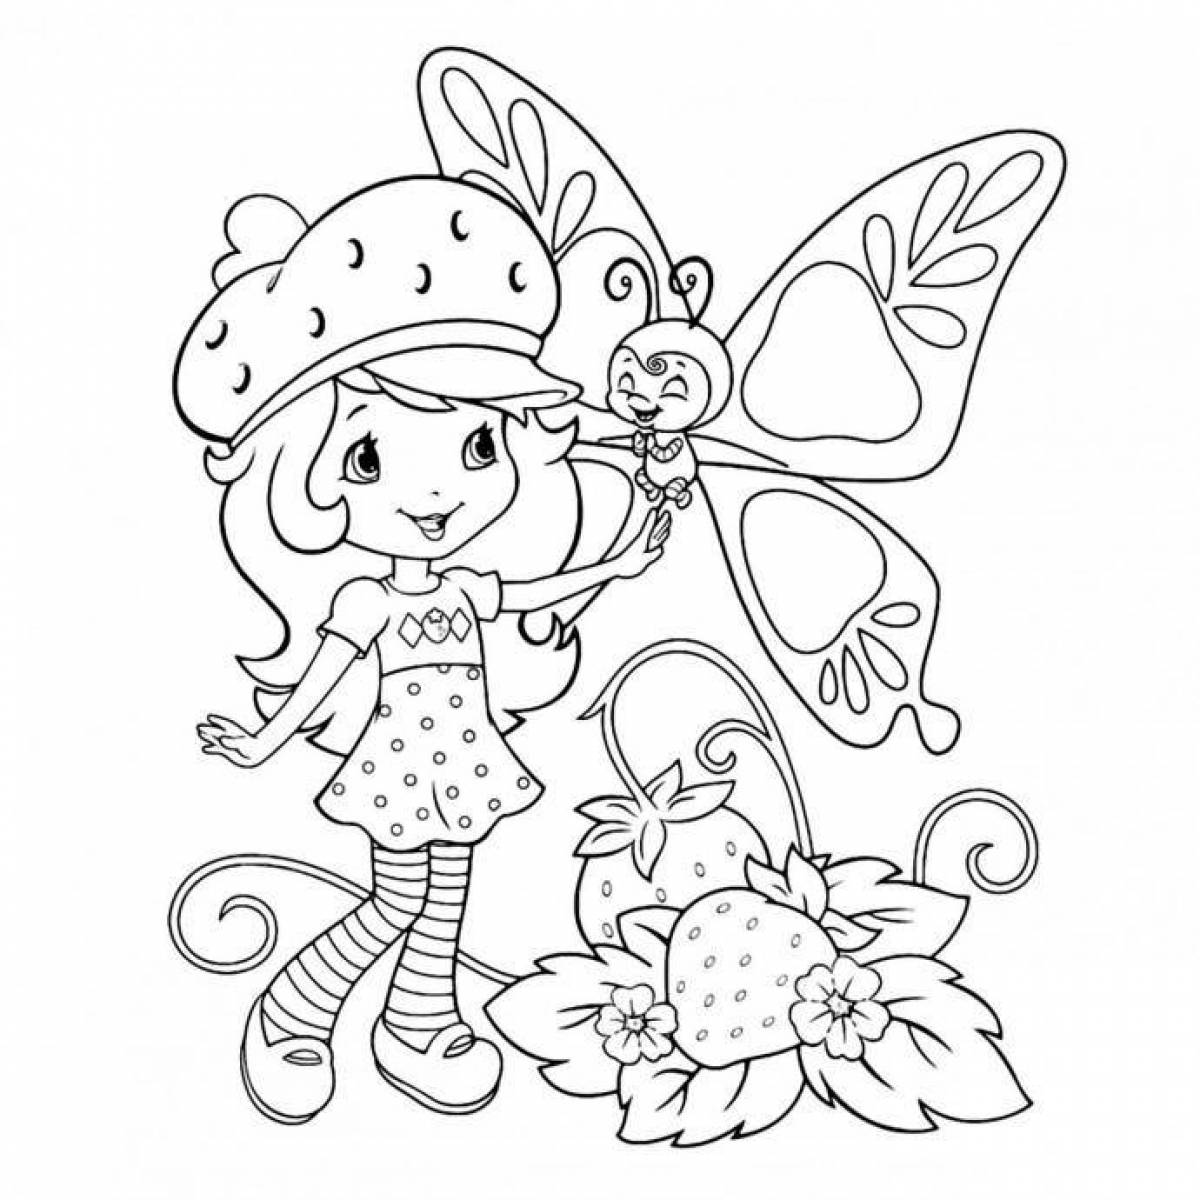 Coloring page adorable strawberry